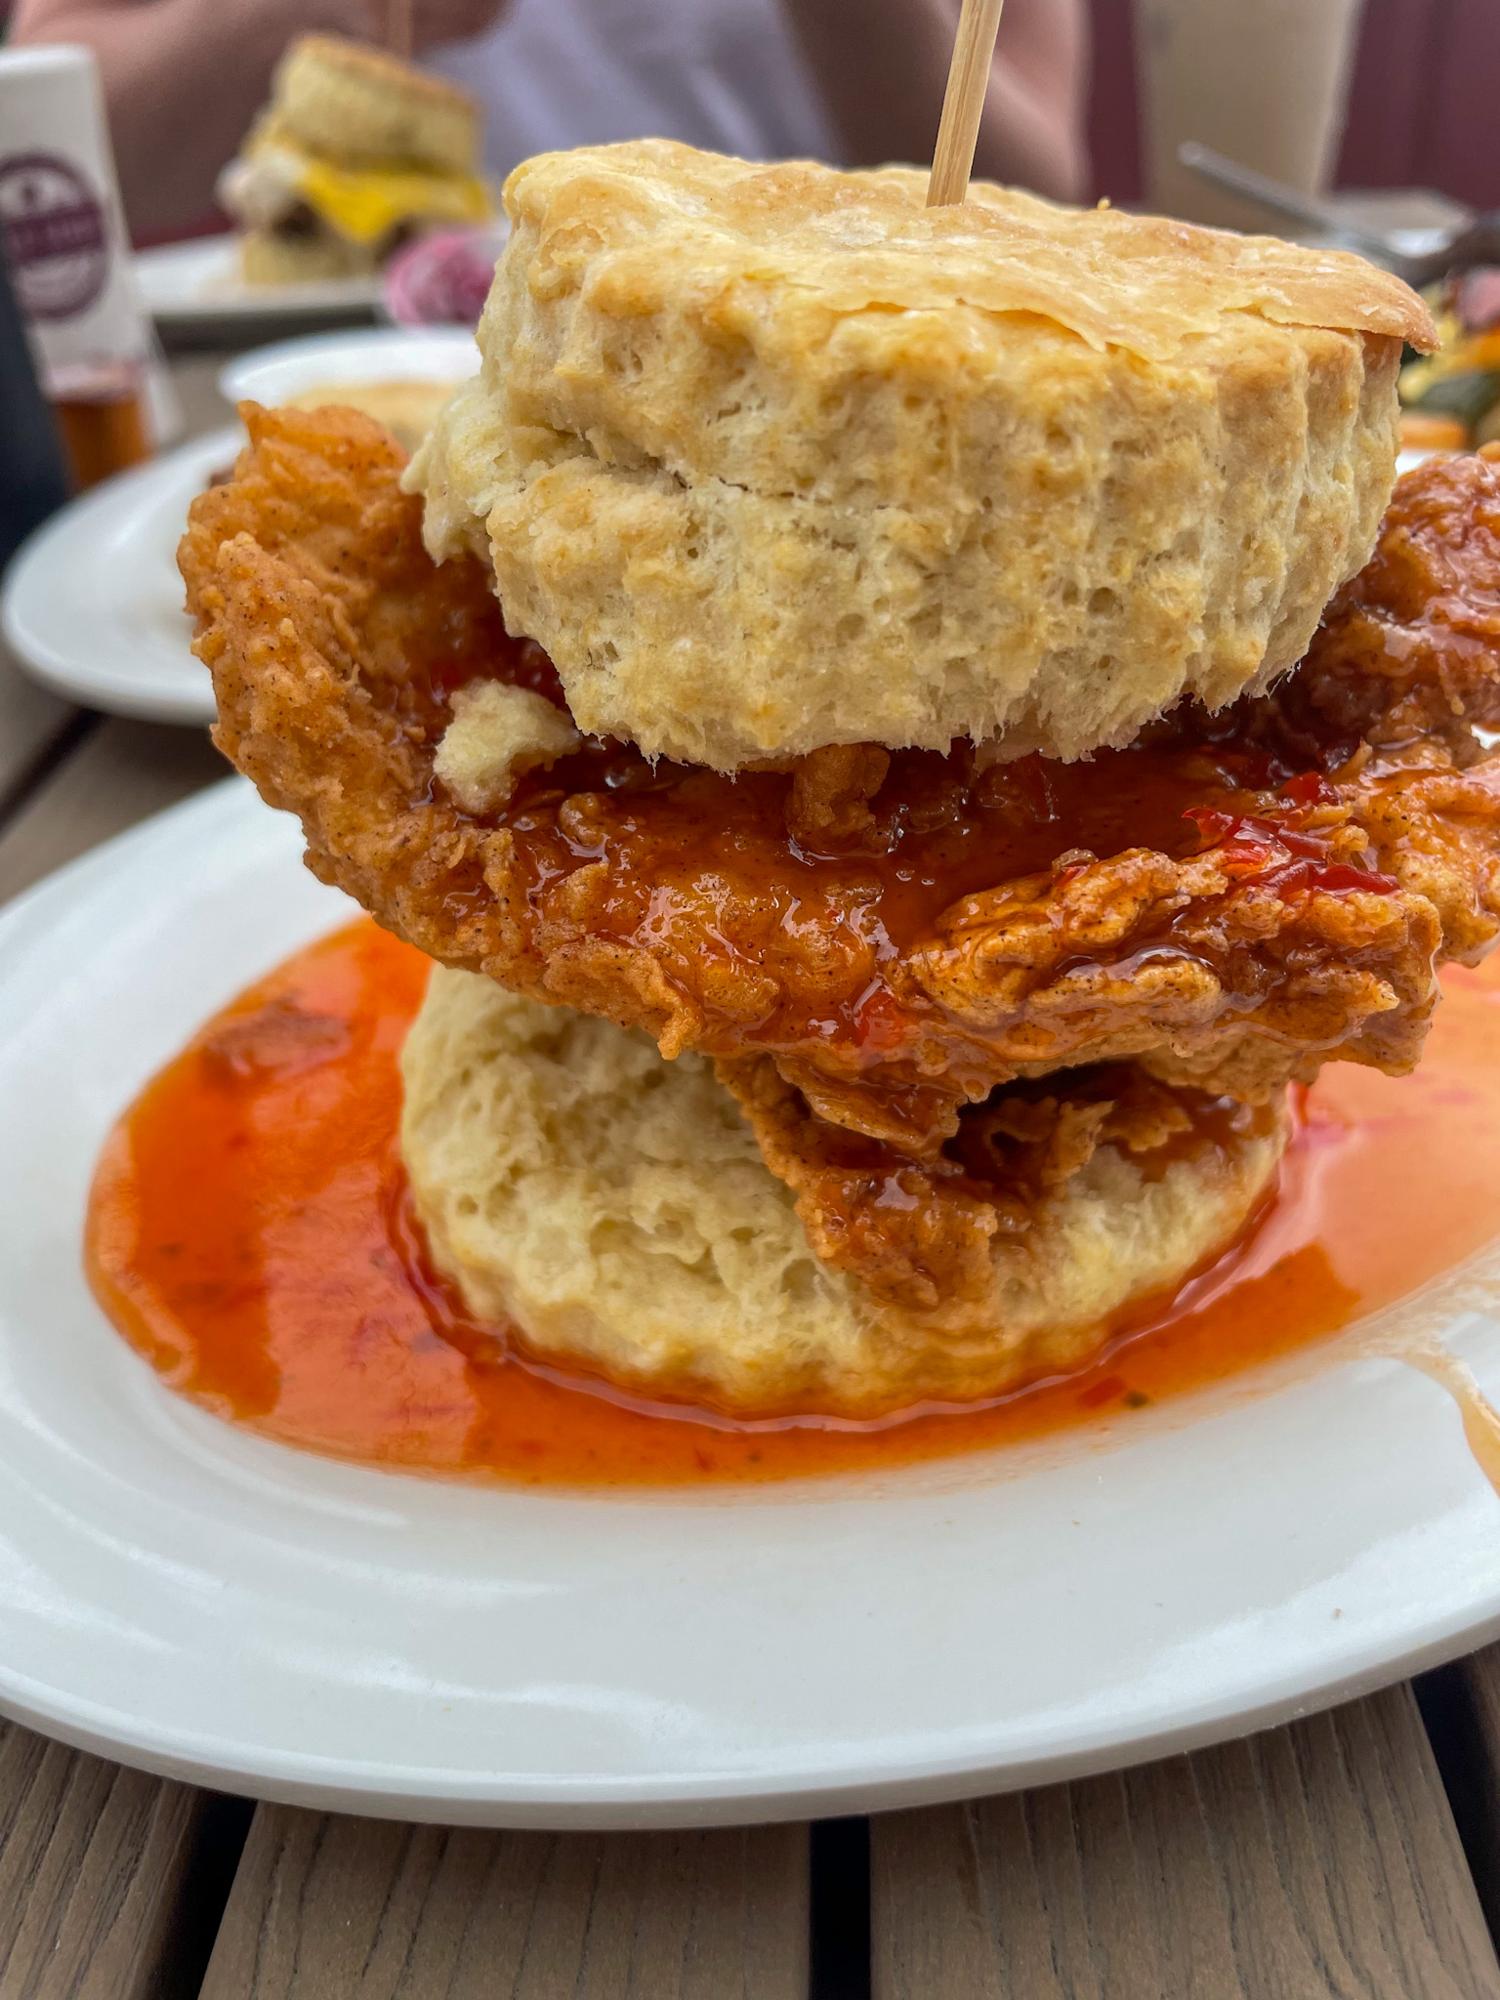 The Squawking Goat biscuit sandwich